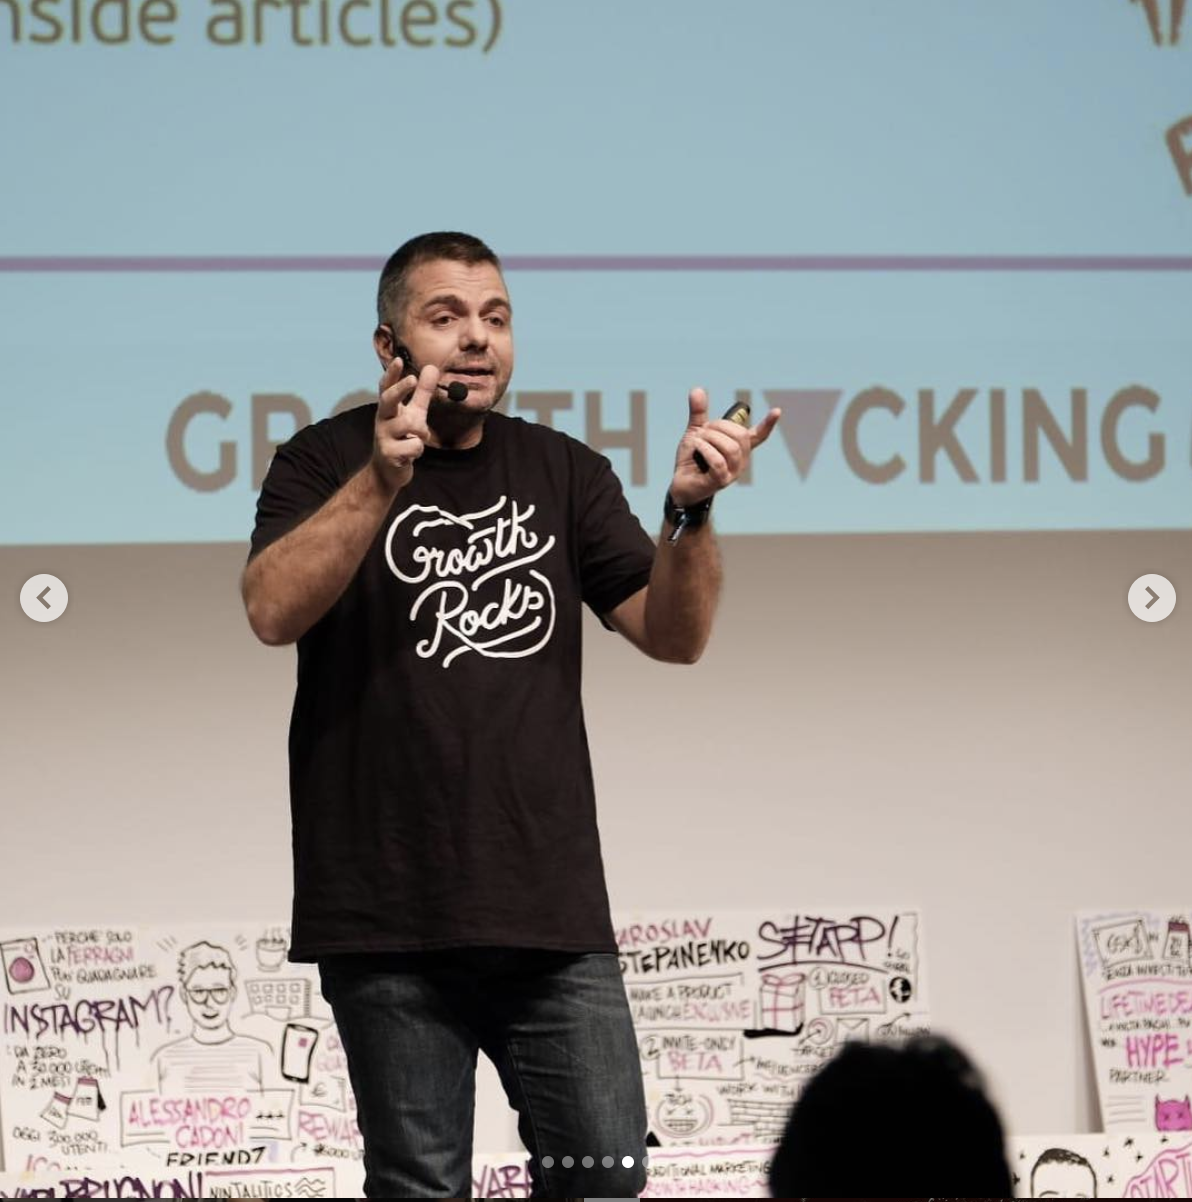 Speaking in GH-Day Italy